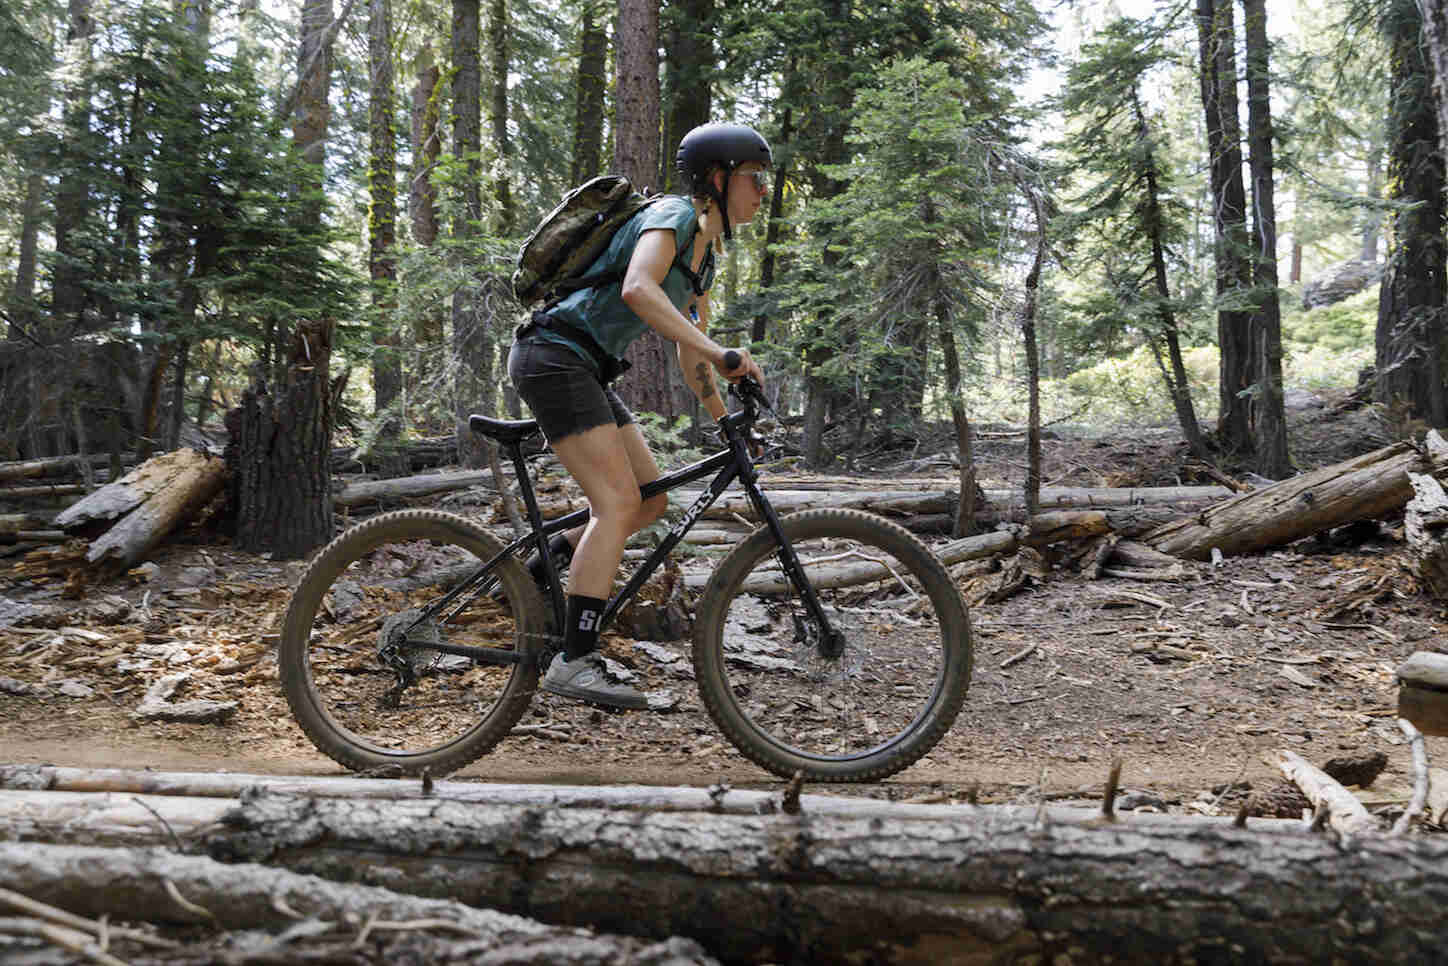 Right profile of a cyclist on a Surly Karate Monkey bike, black, riding on a dirt forest trail, with downed trees scattered around